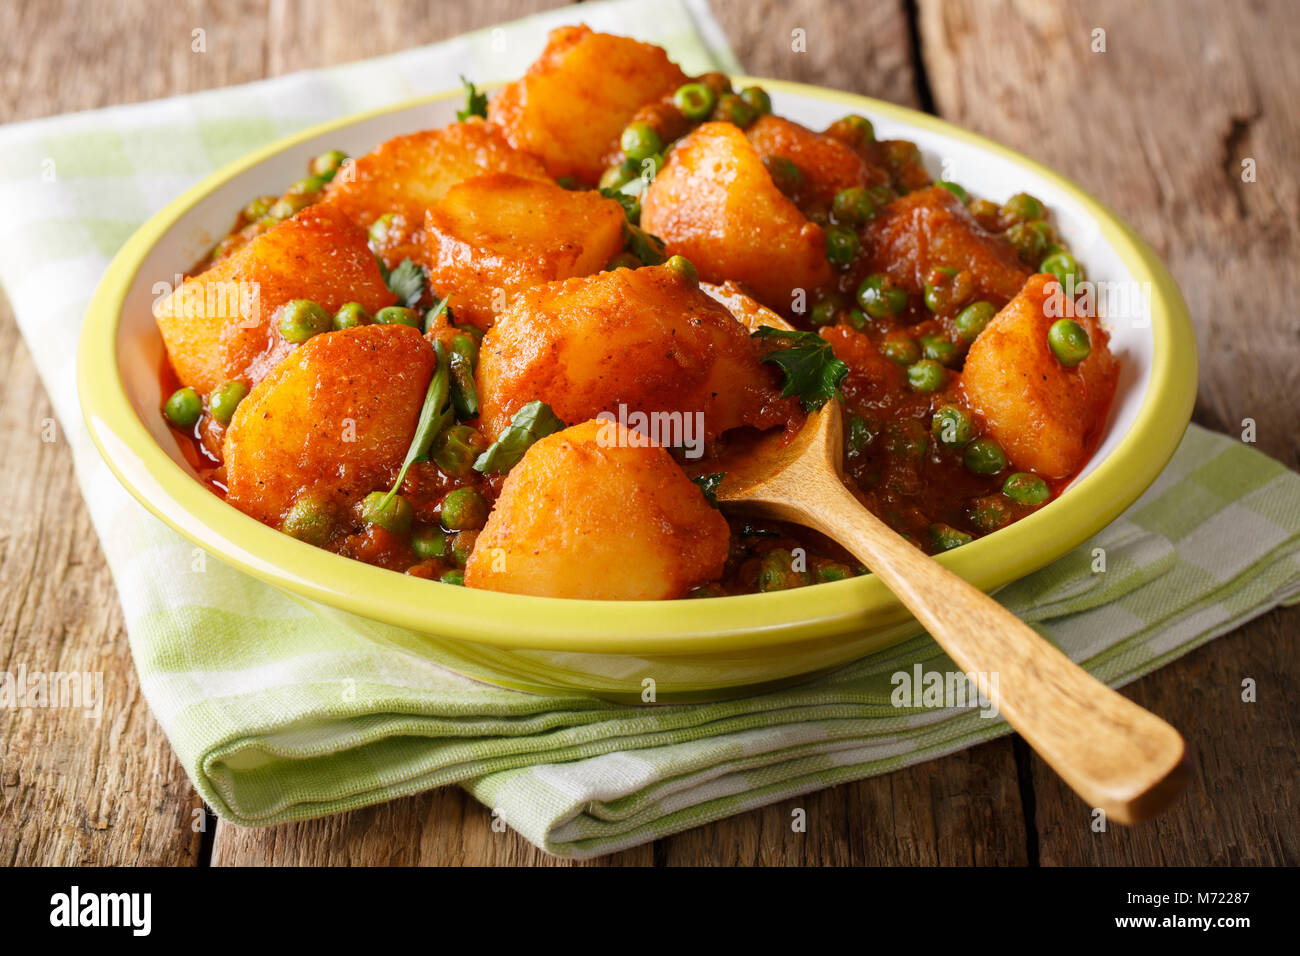 Vegetarian Indian Aloo Matar made from potatoes, green peas, herbs and spicy sauce closeup on a plate. horizontal Stock Photo